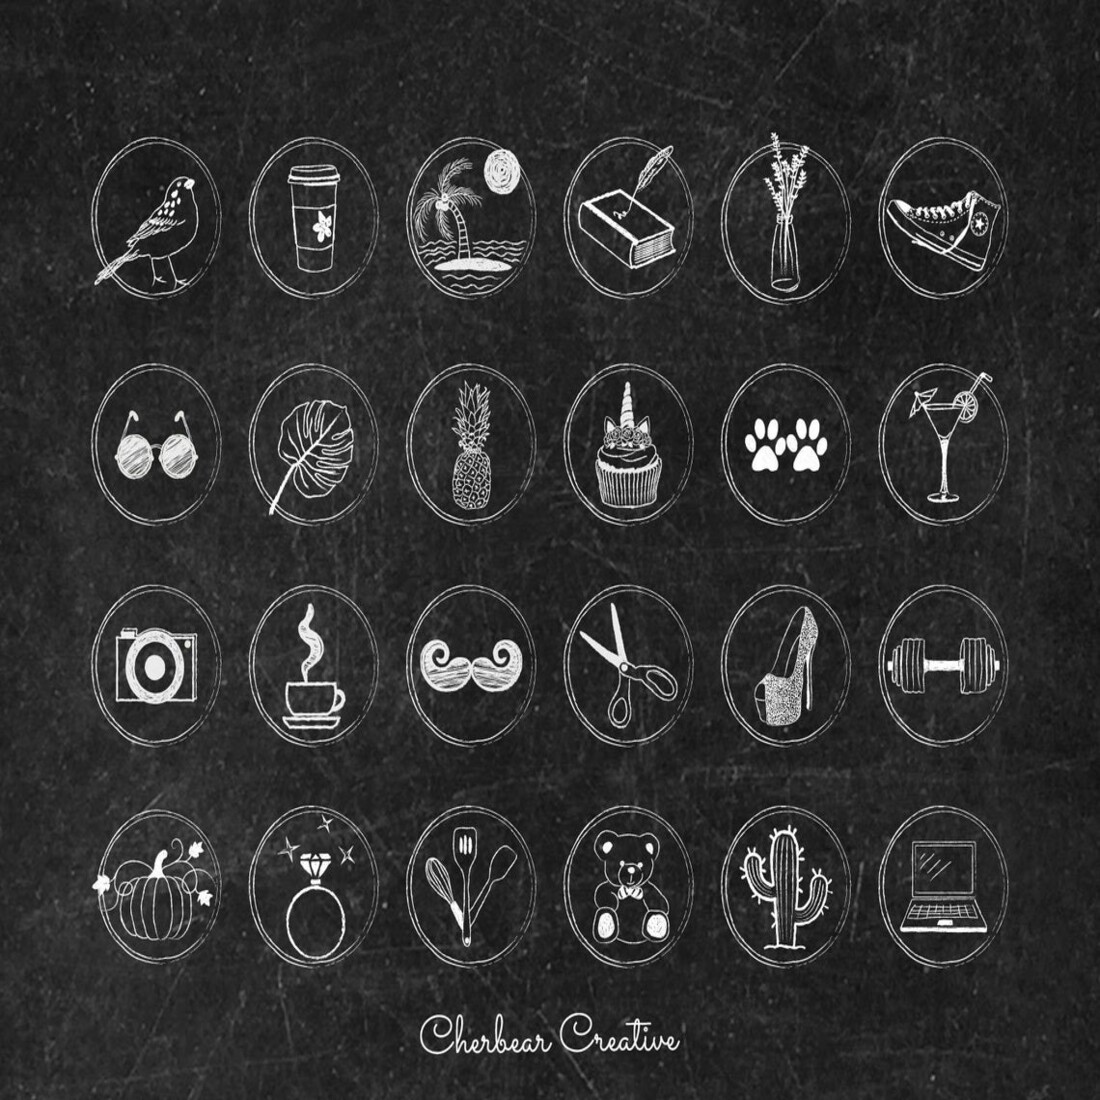 Instagram Story Highlight Covers (54 ChalkBoard Cover Icons) preview image.